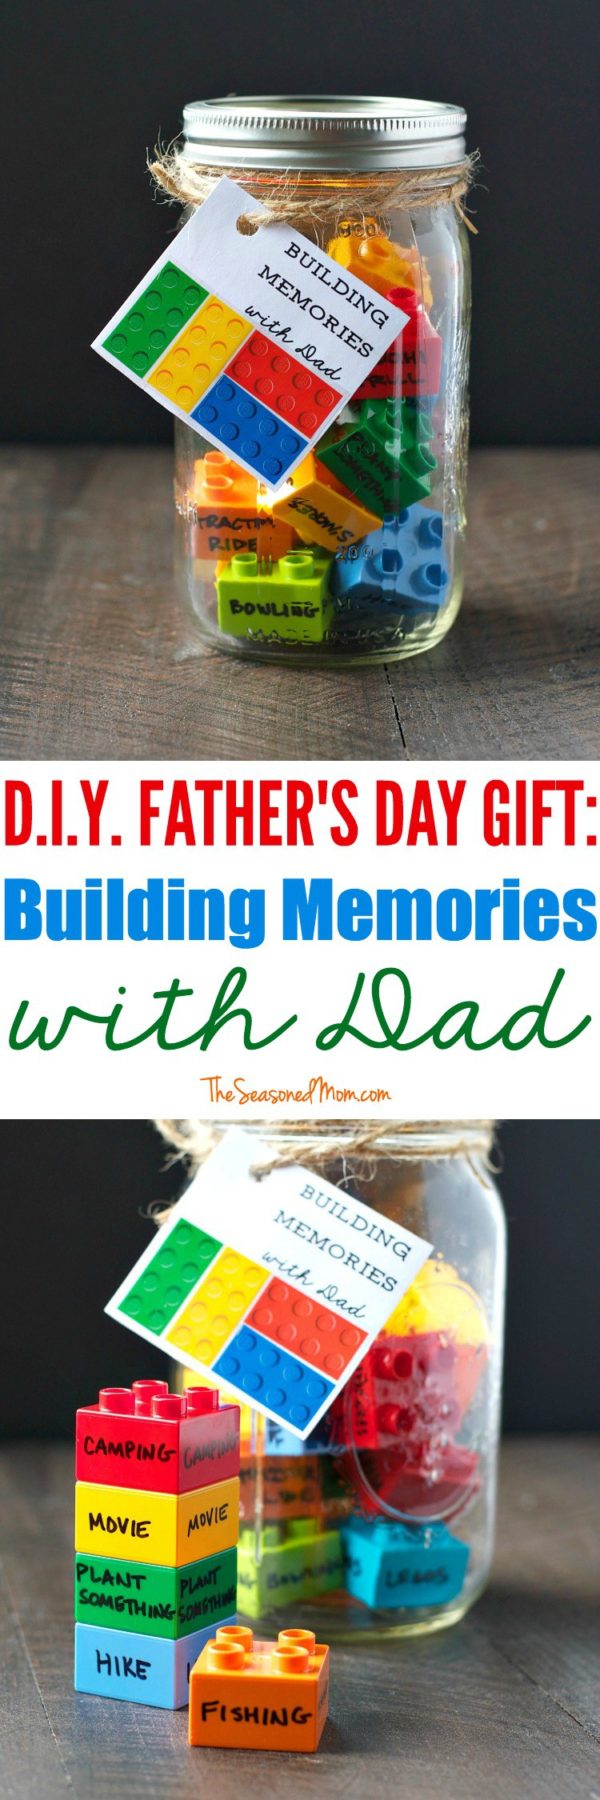 Download 25 Father's Day Crafts for Kids to Make - Modern ...